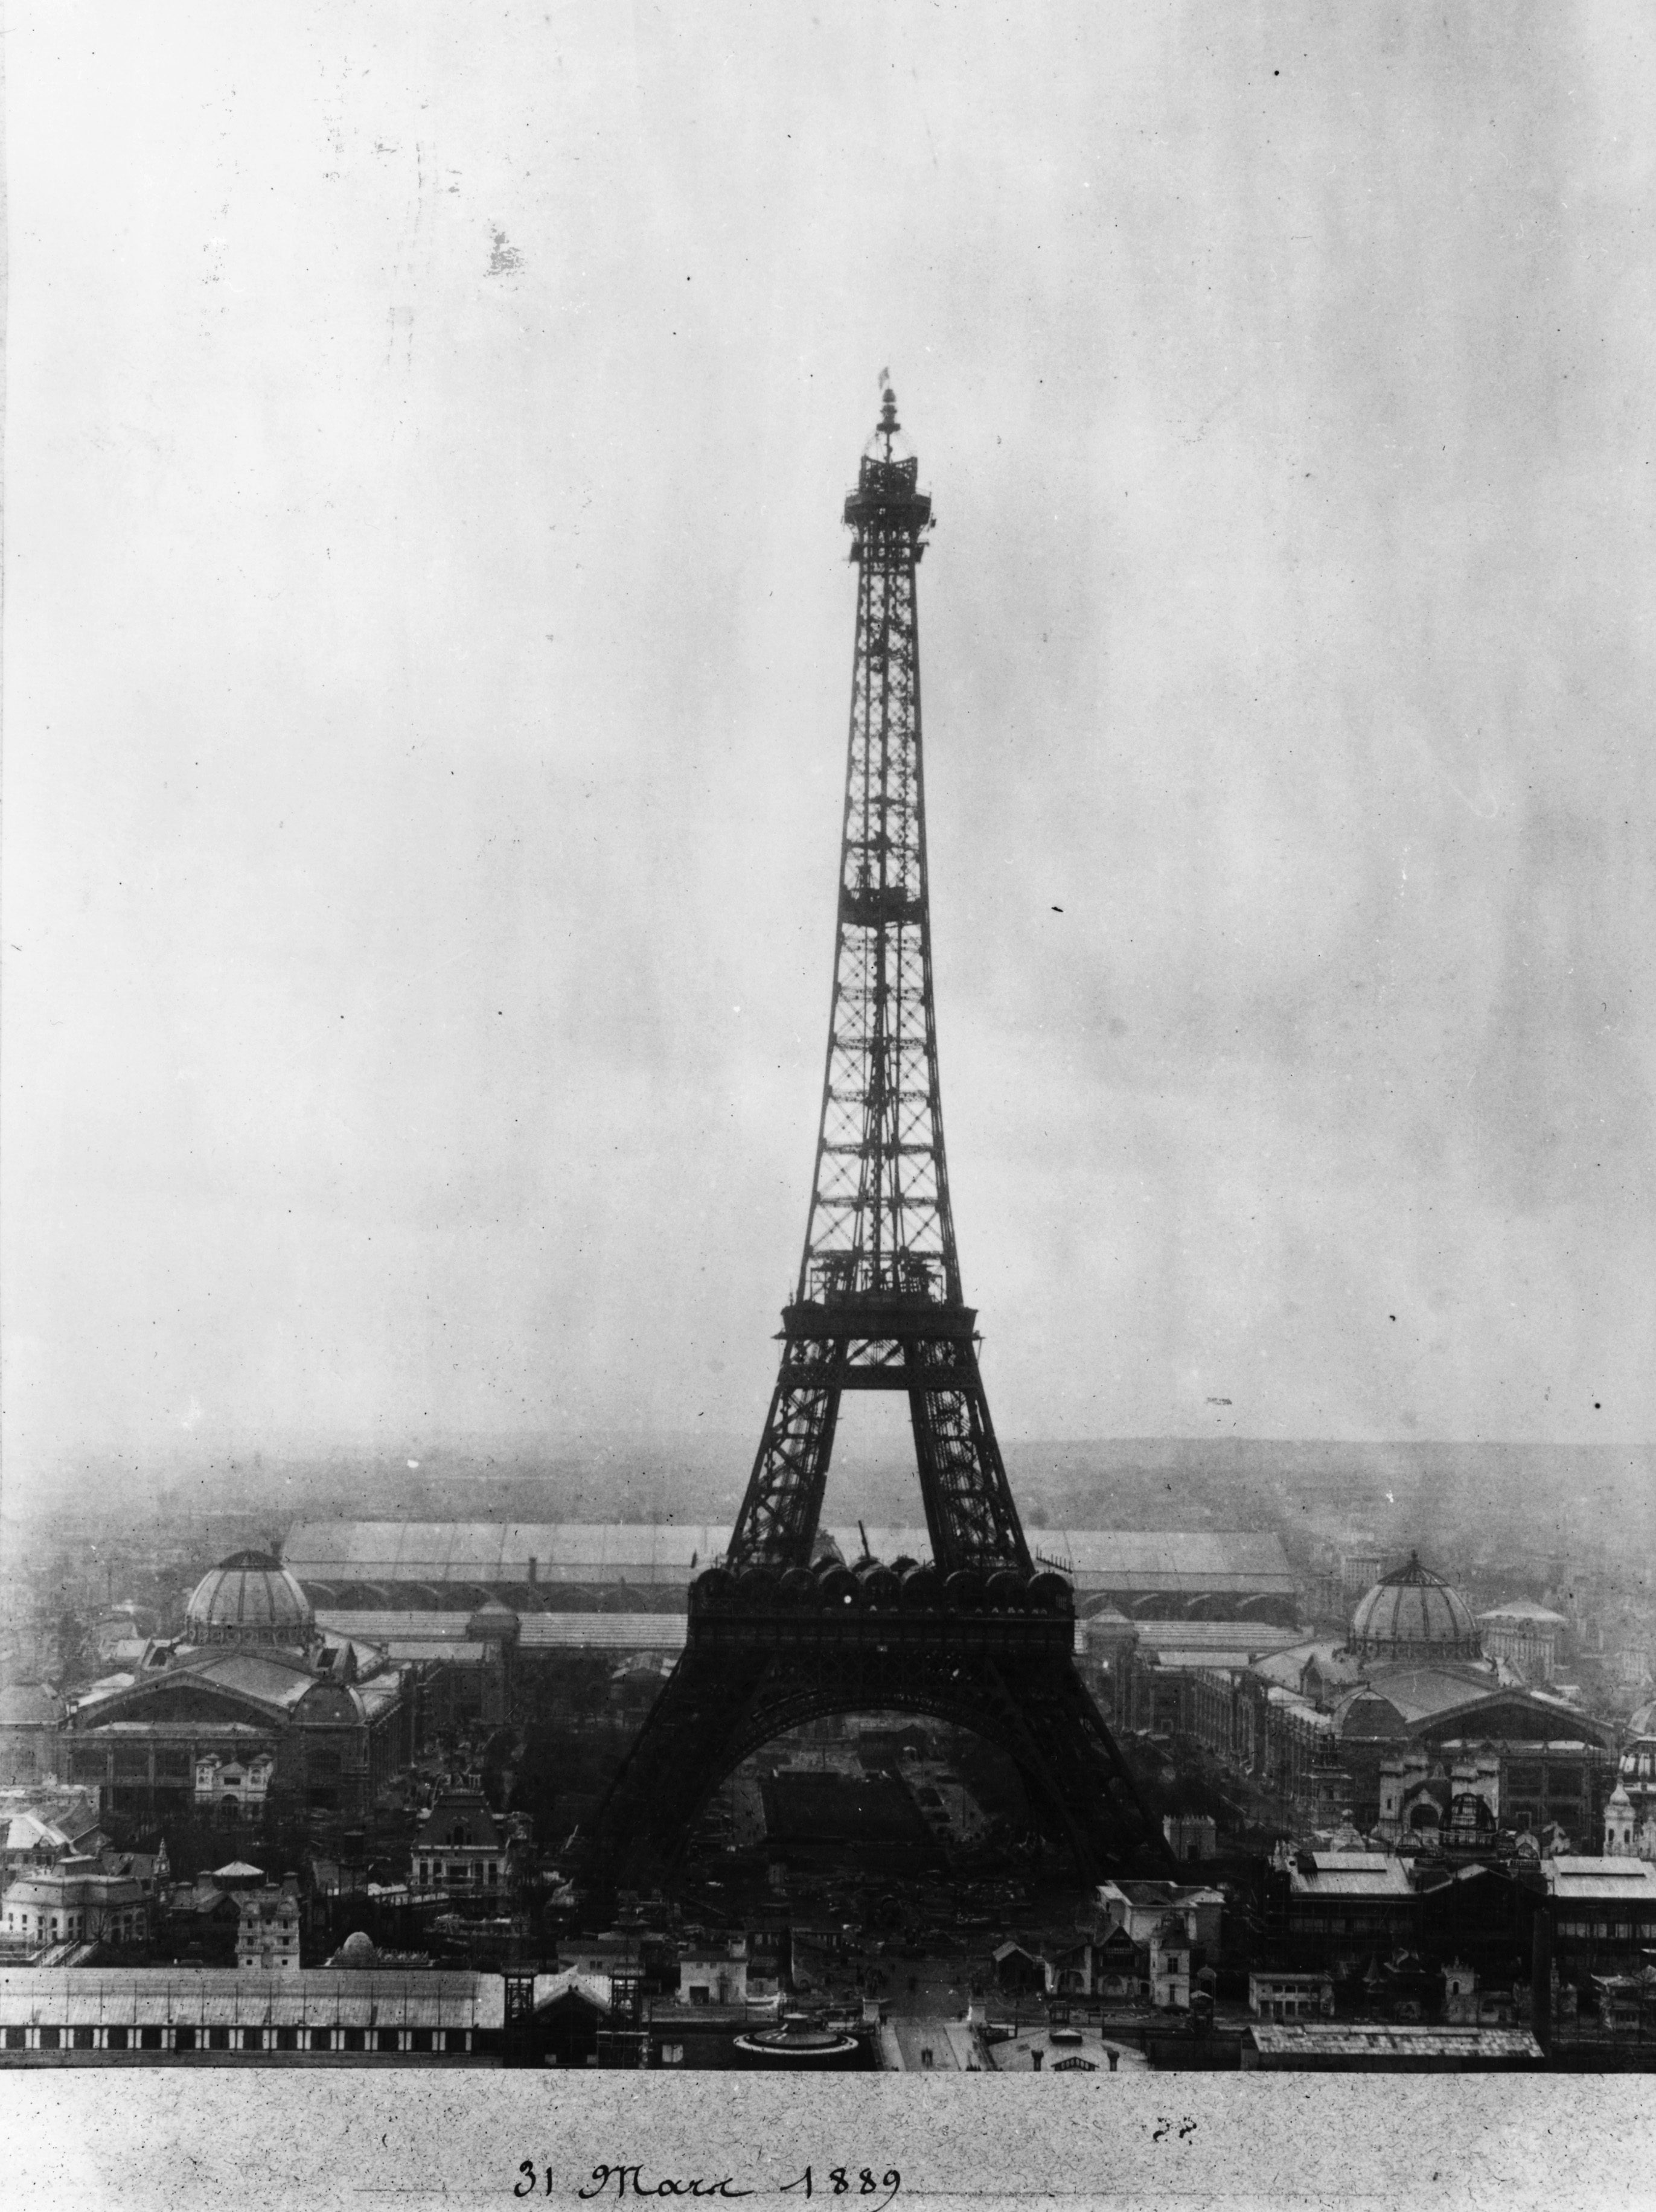 The Eiffel Tower on March 31, 1889, the day of its inauguration. (Getty)